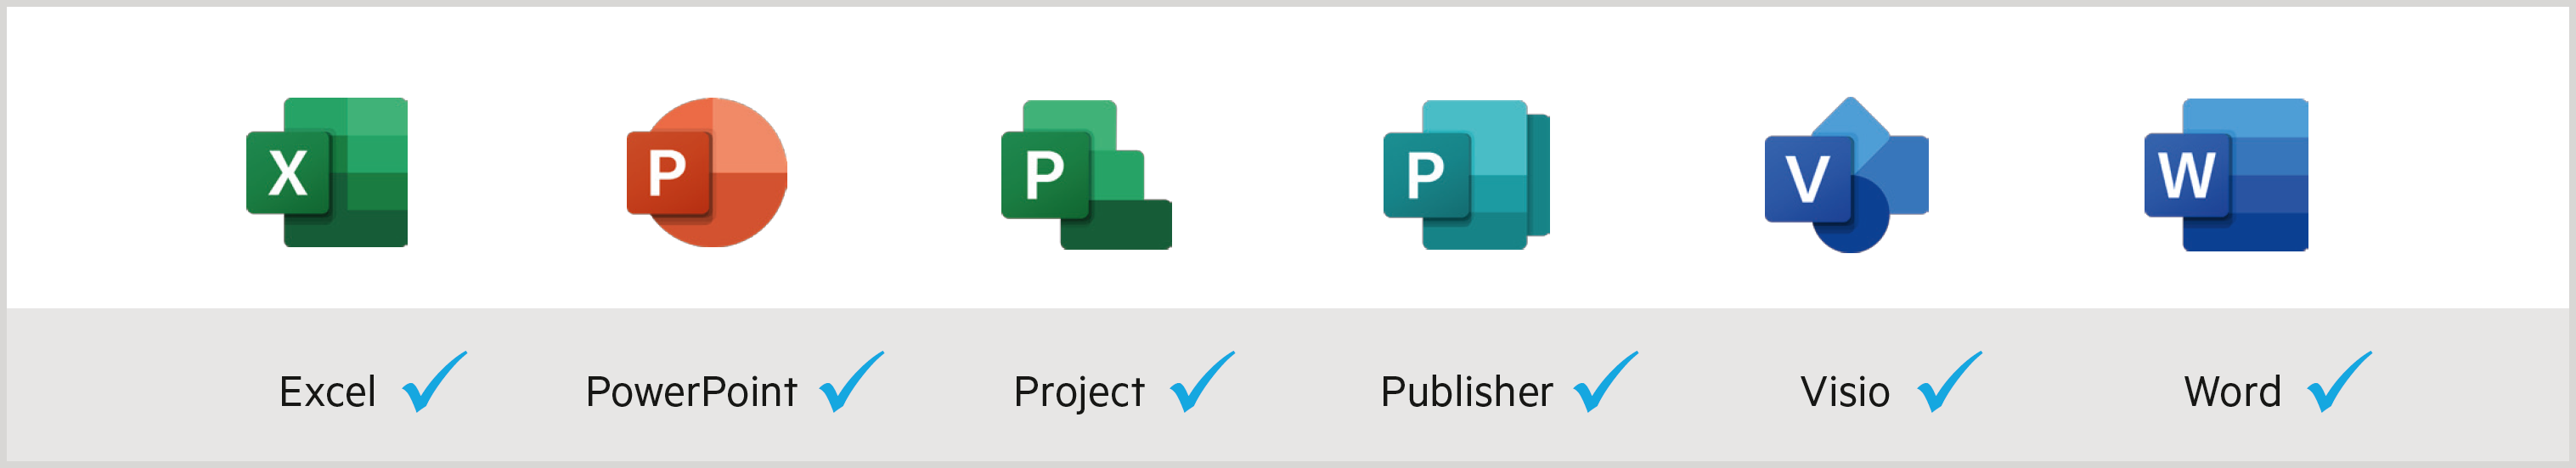 Supported applications: Excel, PowerPoint, Project, Publisher, Visio, Word